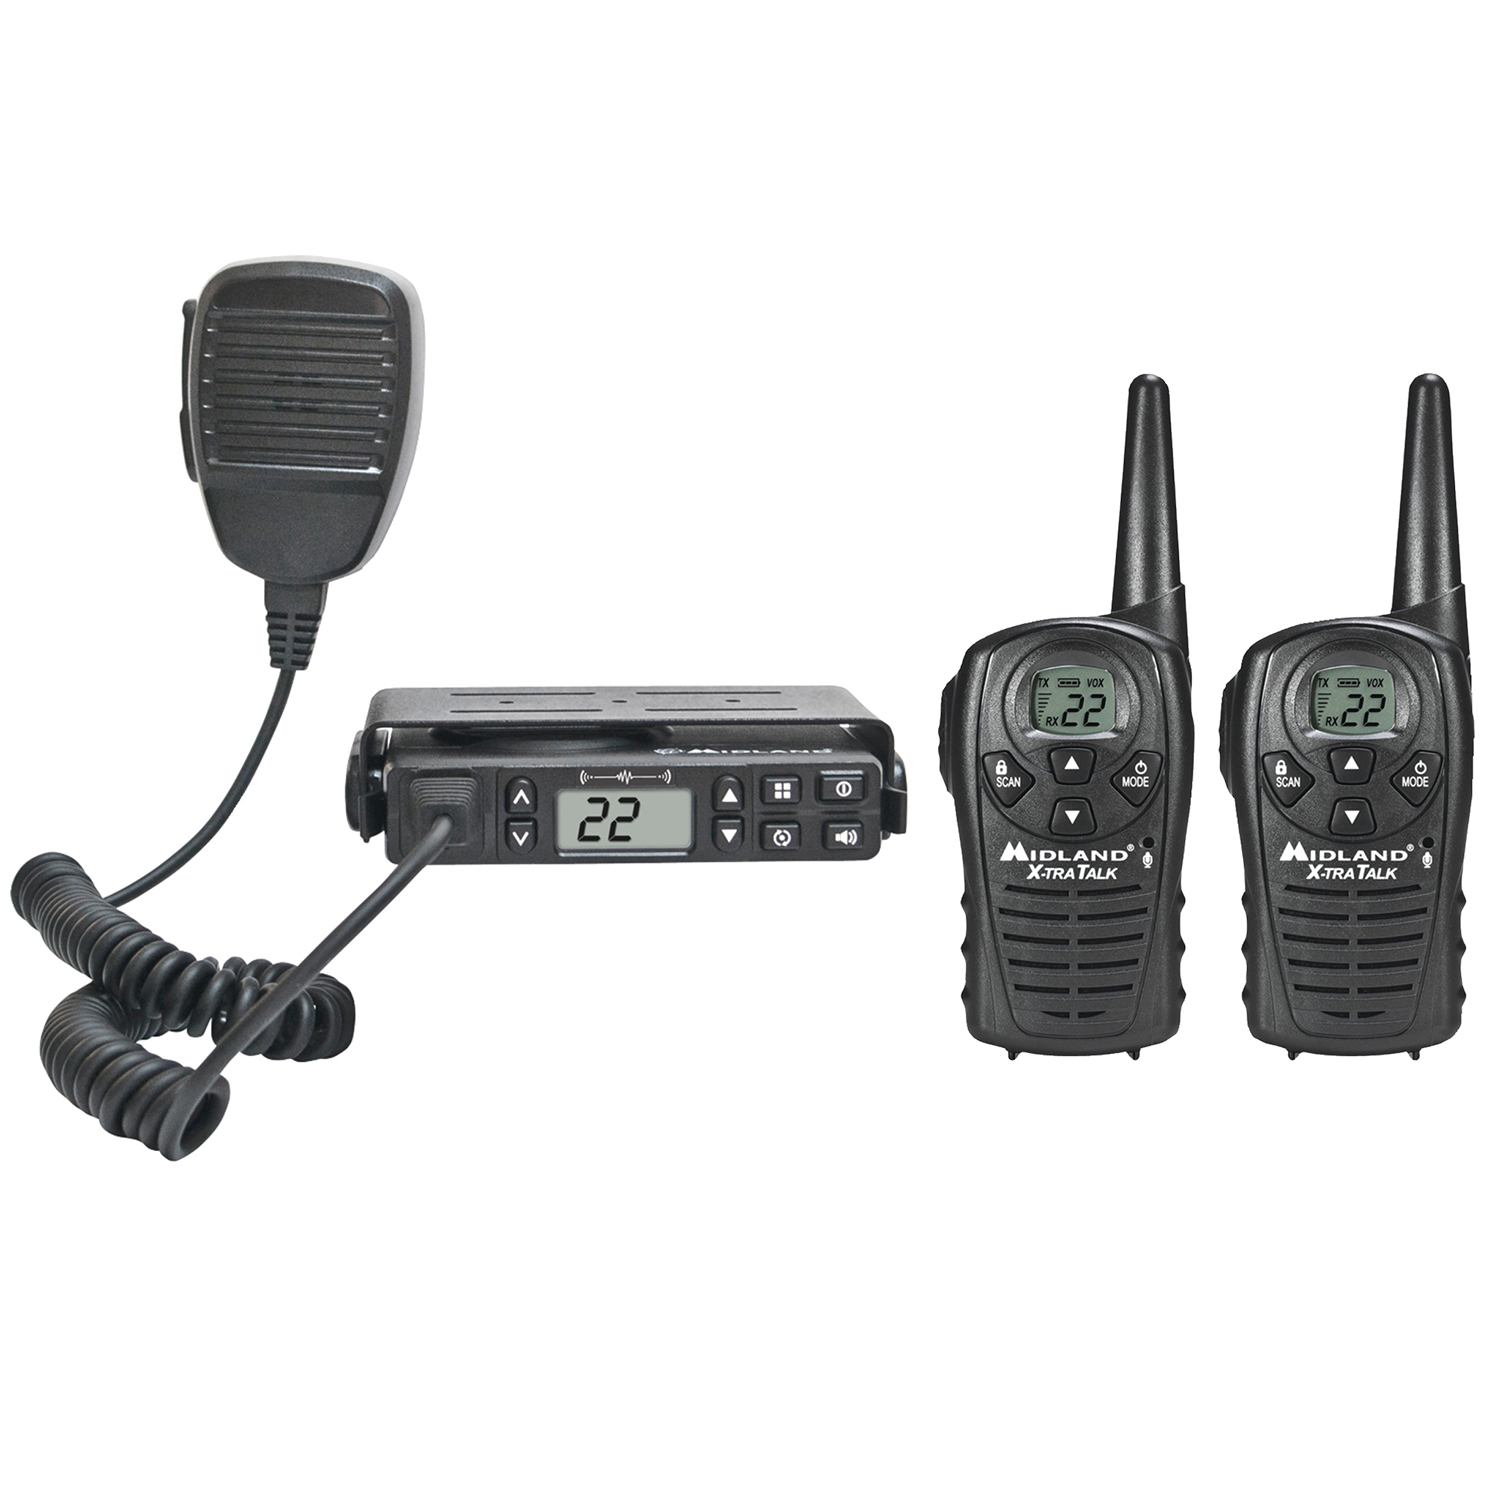 Midland 843631100479 microMOBILE Fixed-Mount GMRS 2-Way Radio with Magnetic Mount Antenna & pair of Midland 18-Mile GMRS Radios - image 1 of 3